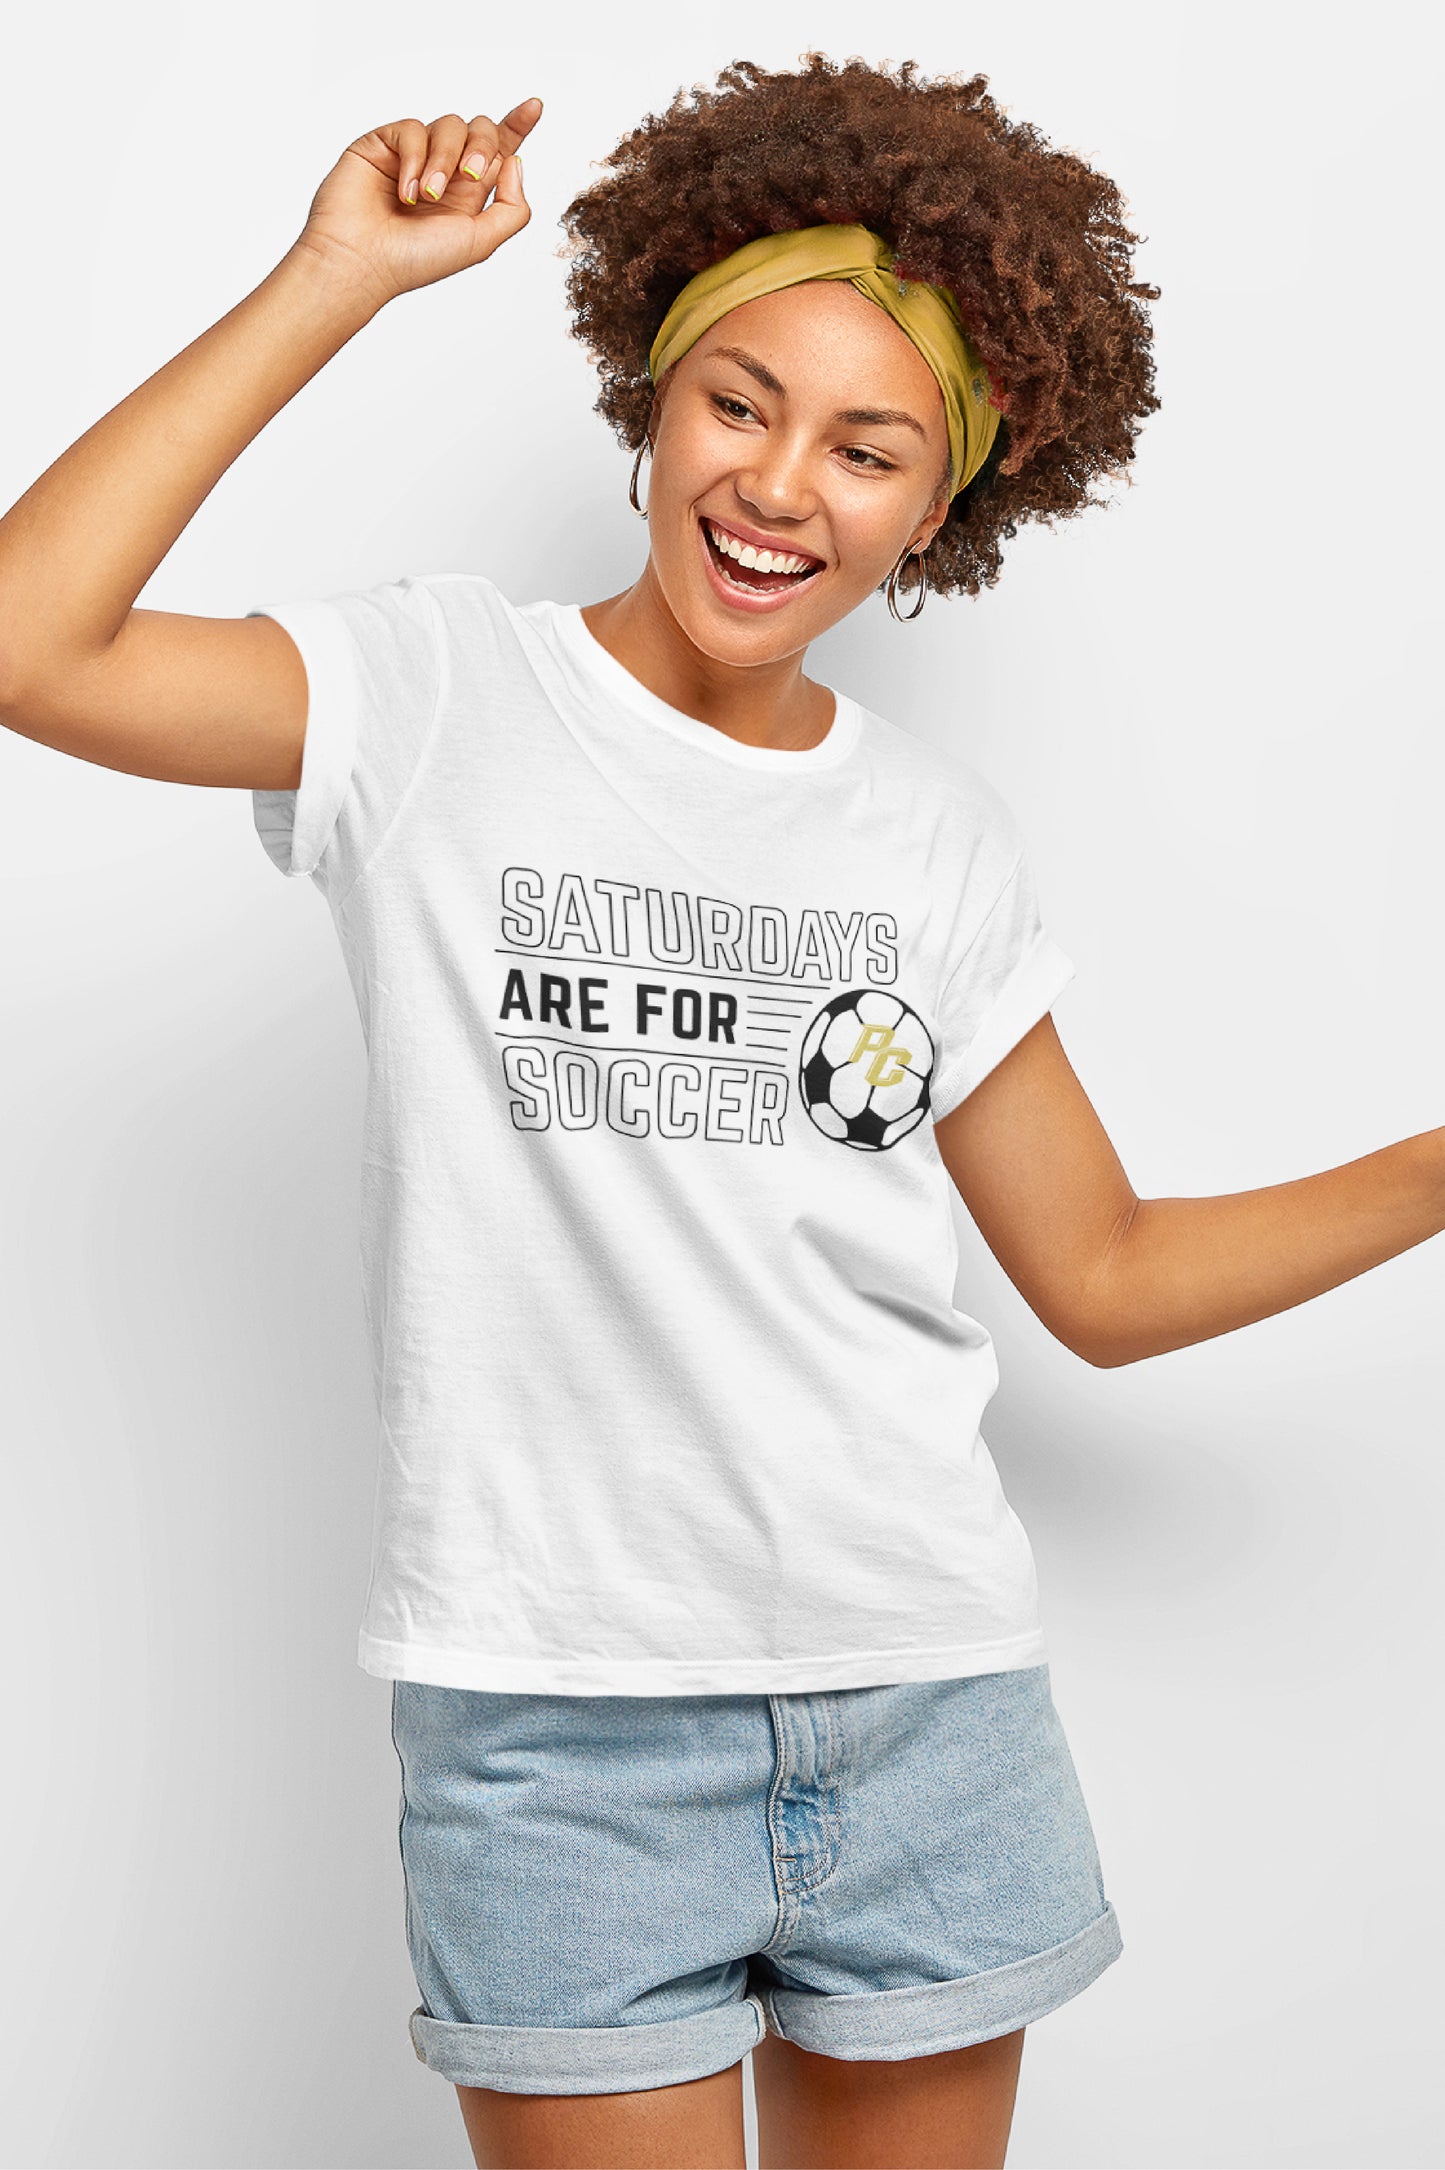 Saturdays are for Soccer - T-Shirt (White)